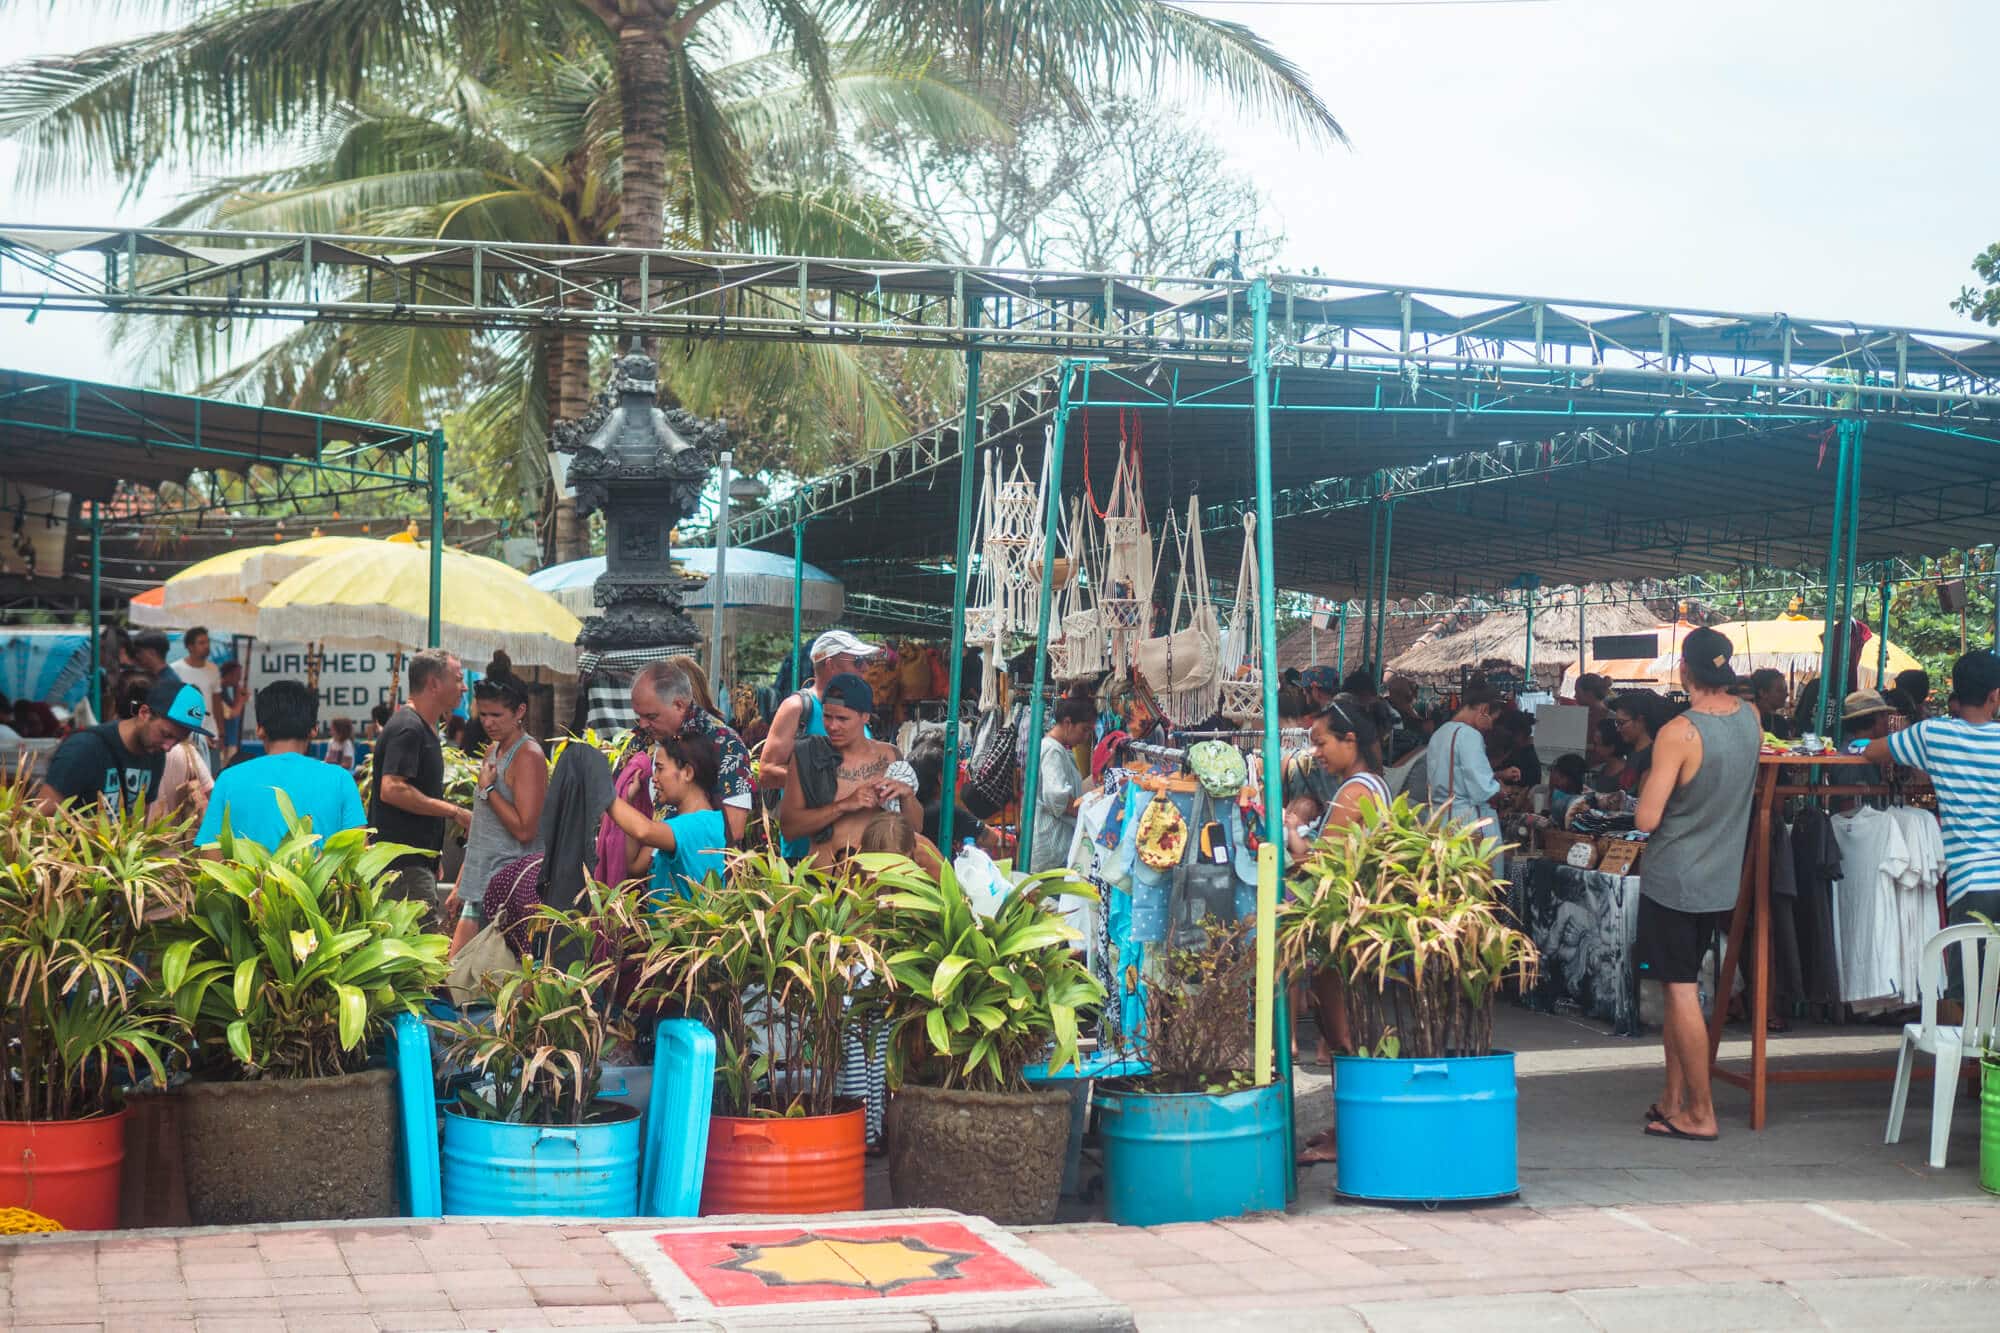 3 super cool markets in Canggu, Bali where you can buy jewelry, organic food, natural skin care, vintage clothing and other beautiful handicrafts - Old Man's Saturday Market